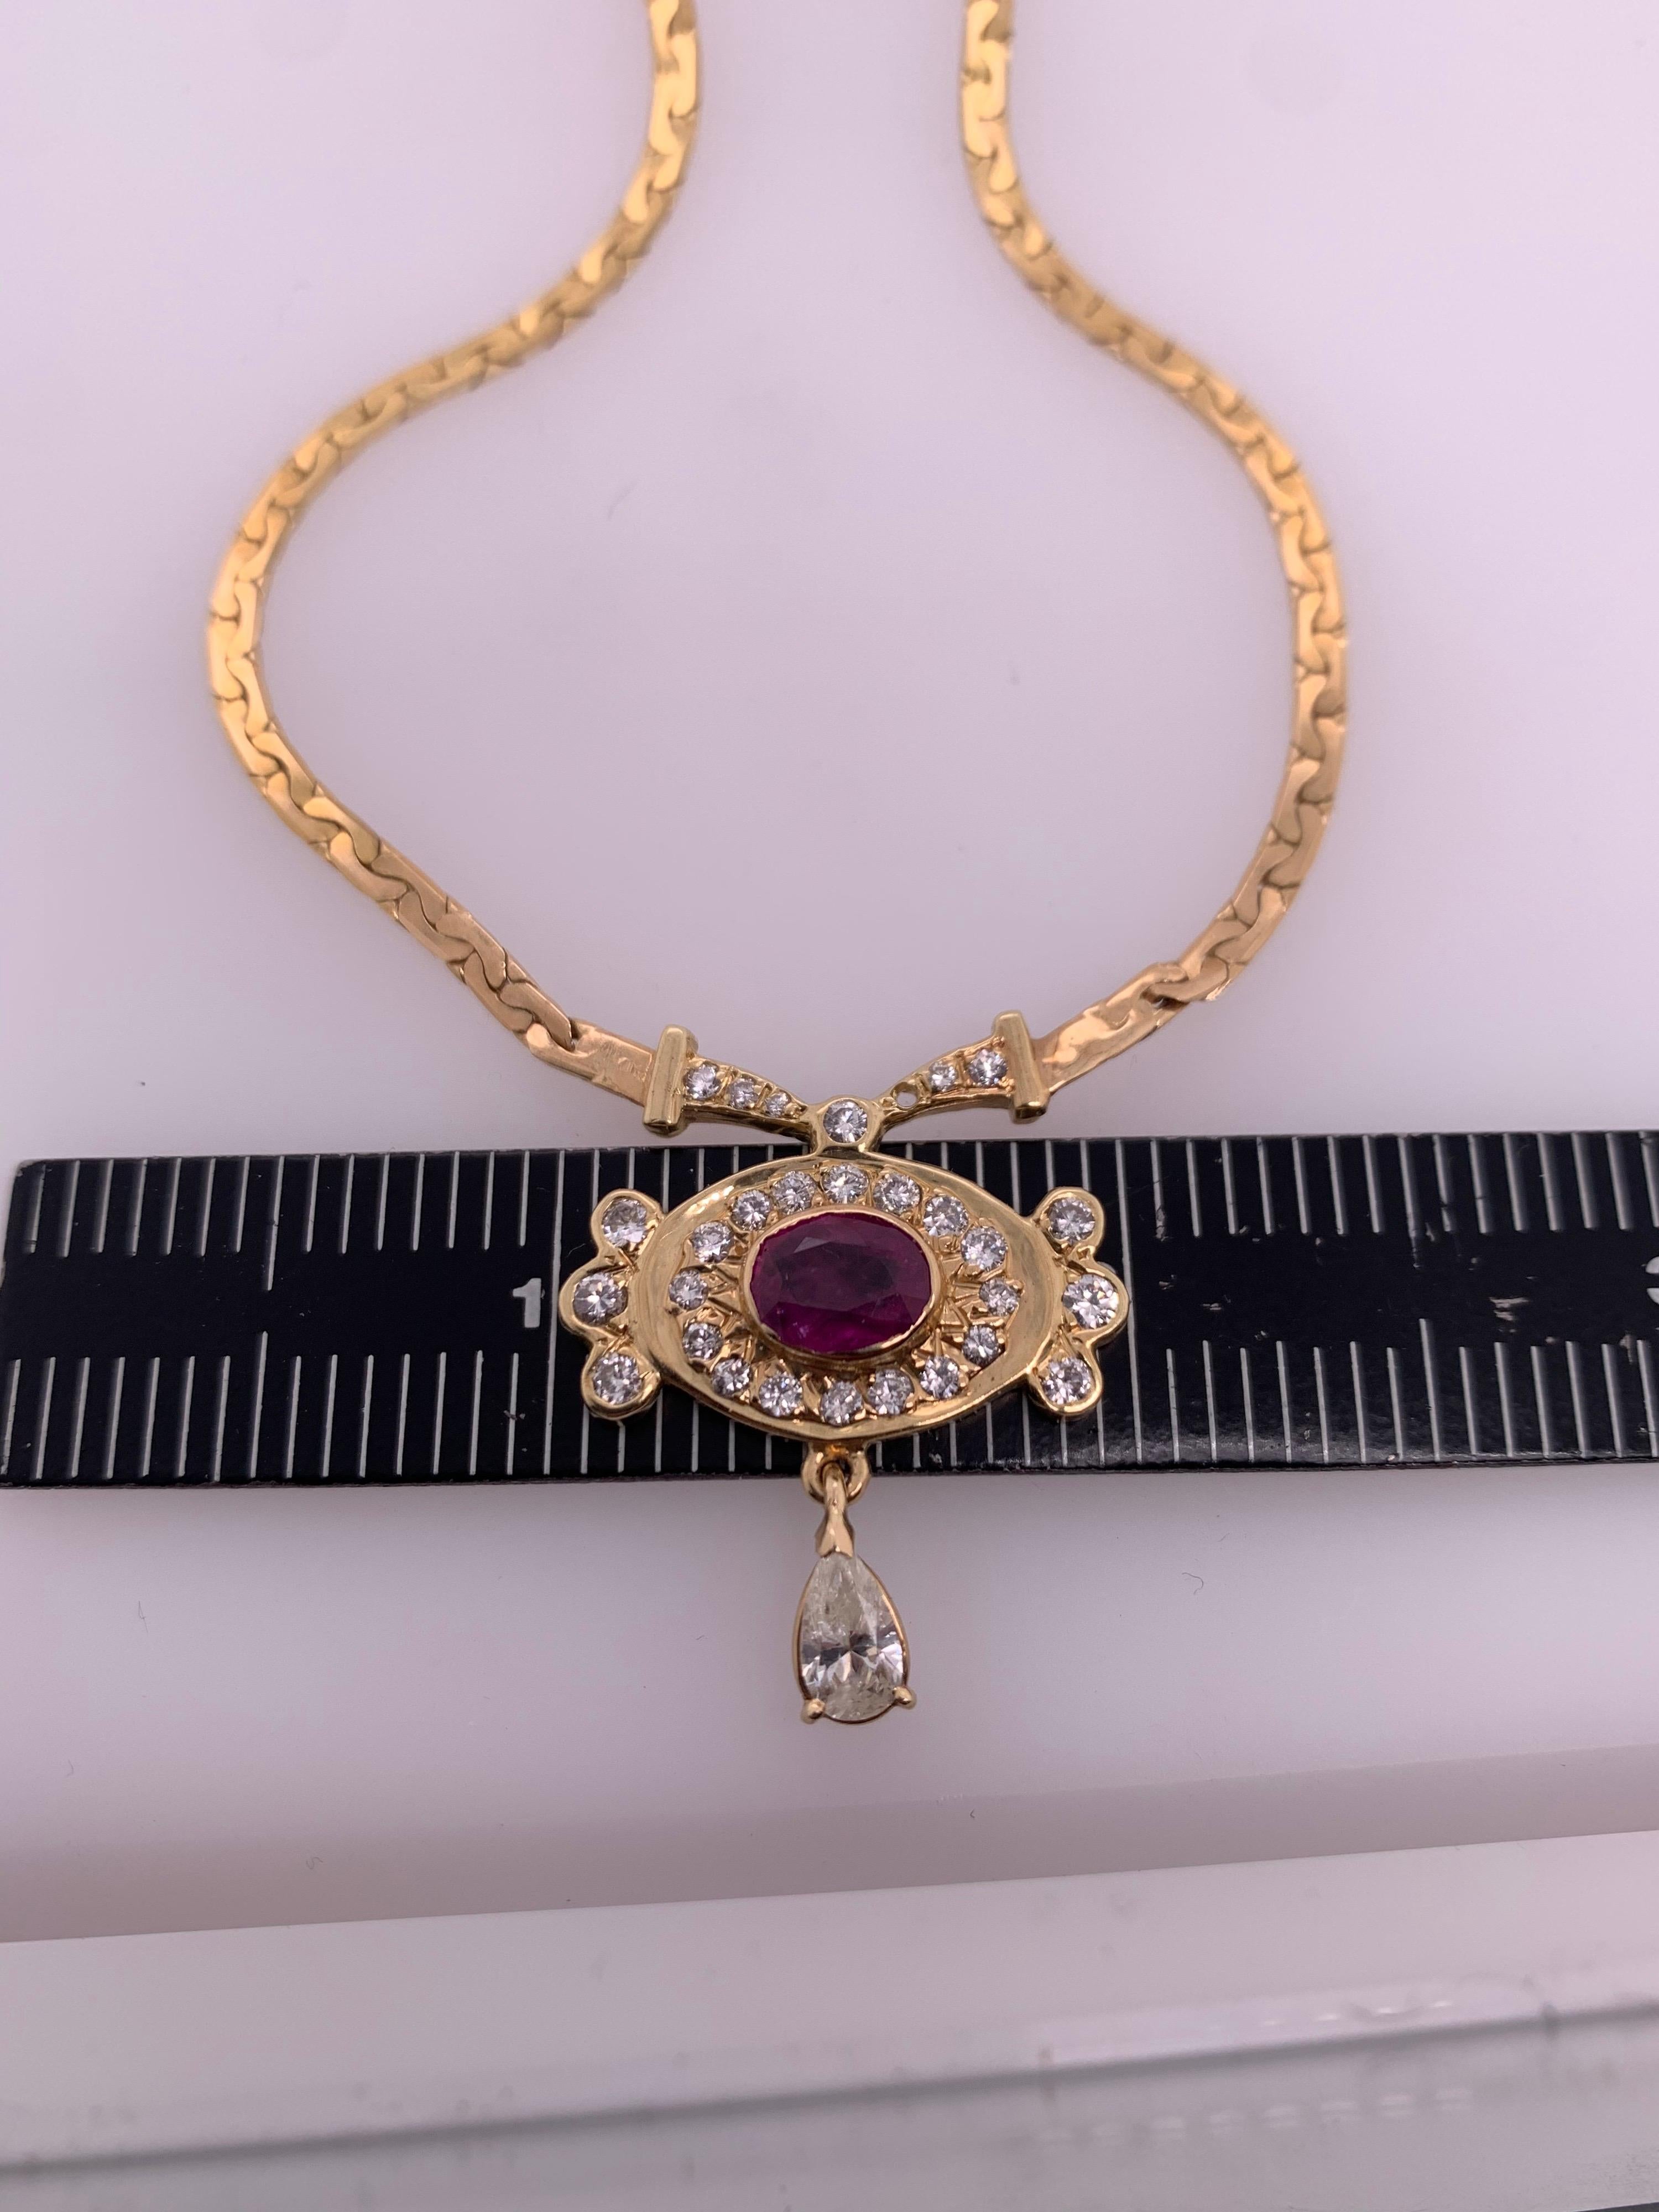 Women's or Men's Retro Gold Necklace 3.25 Carat Total Natural Ruby & Diamond Gem Stone circa 1960 For Sale